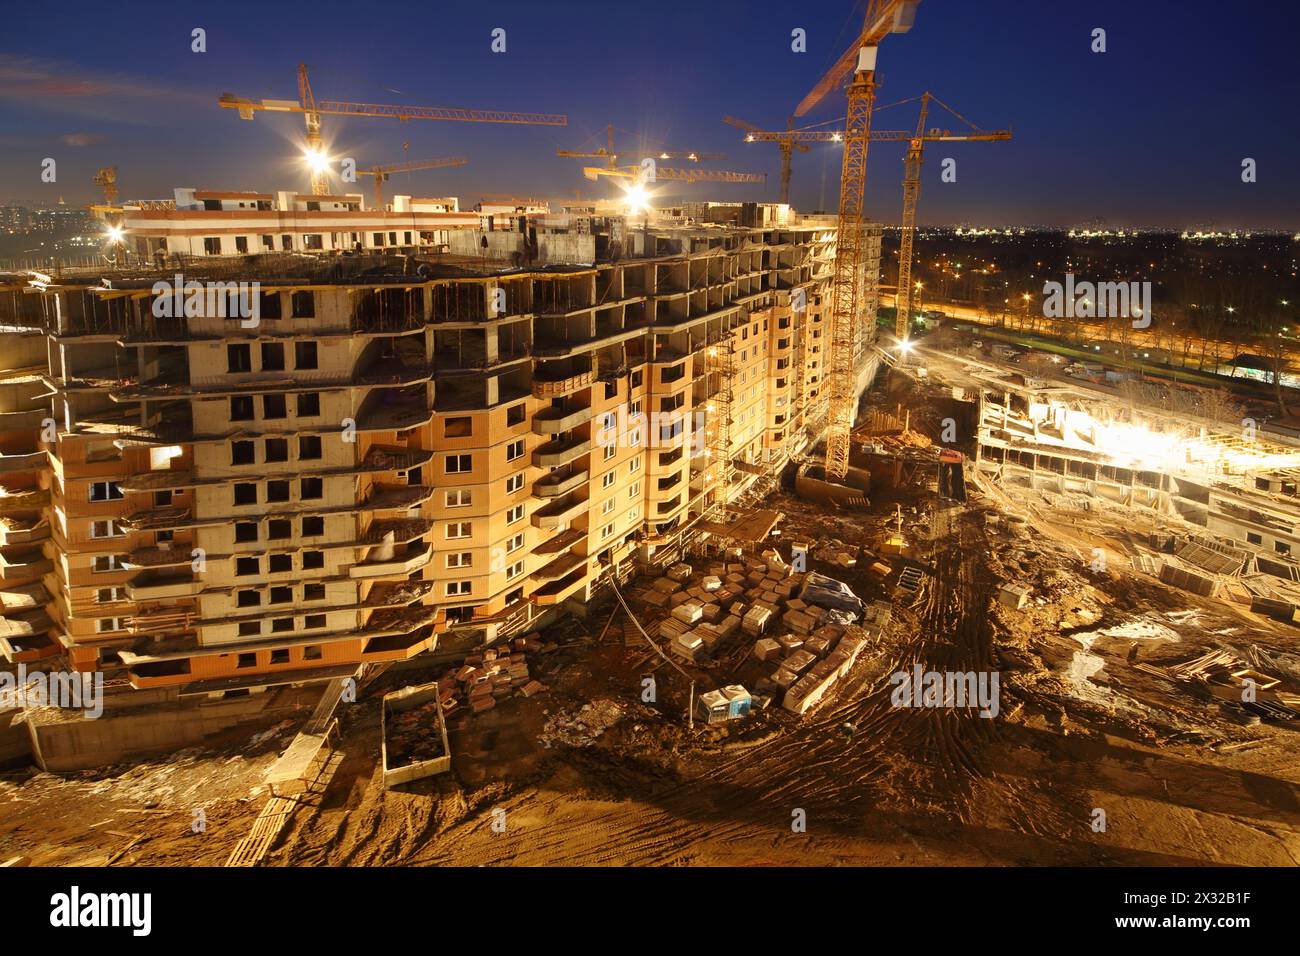 Lots of tower cranes build high-rise residential buildings at night. Stock Photo